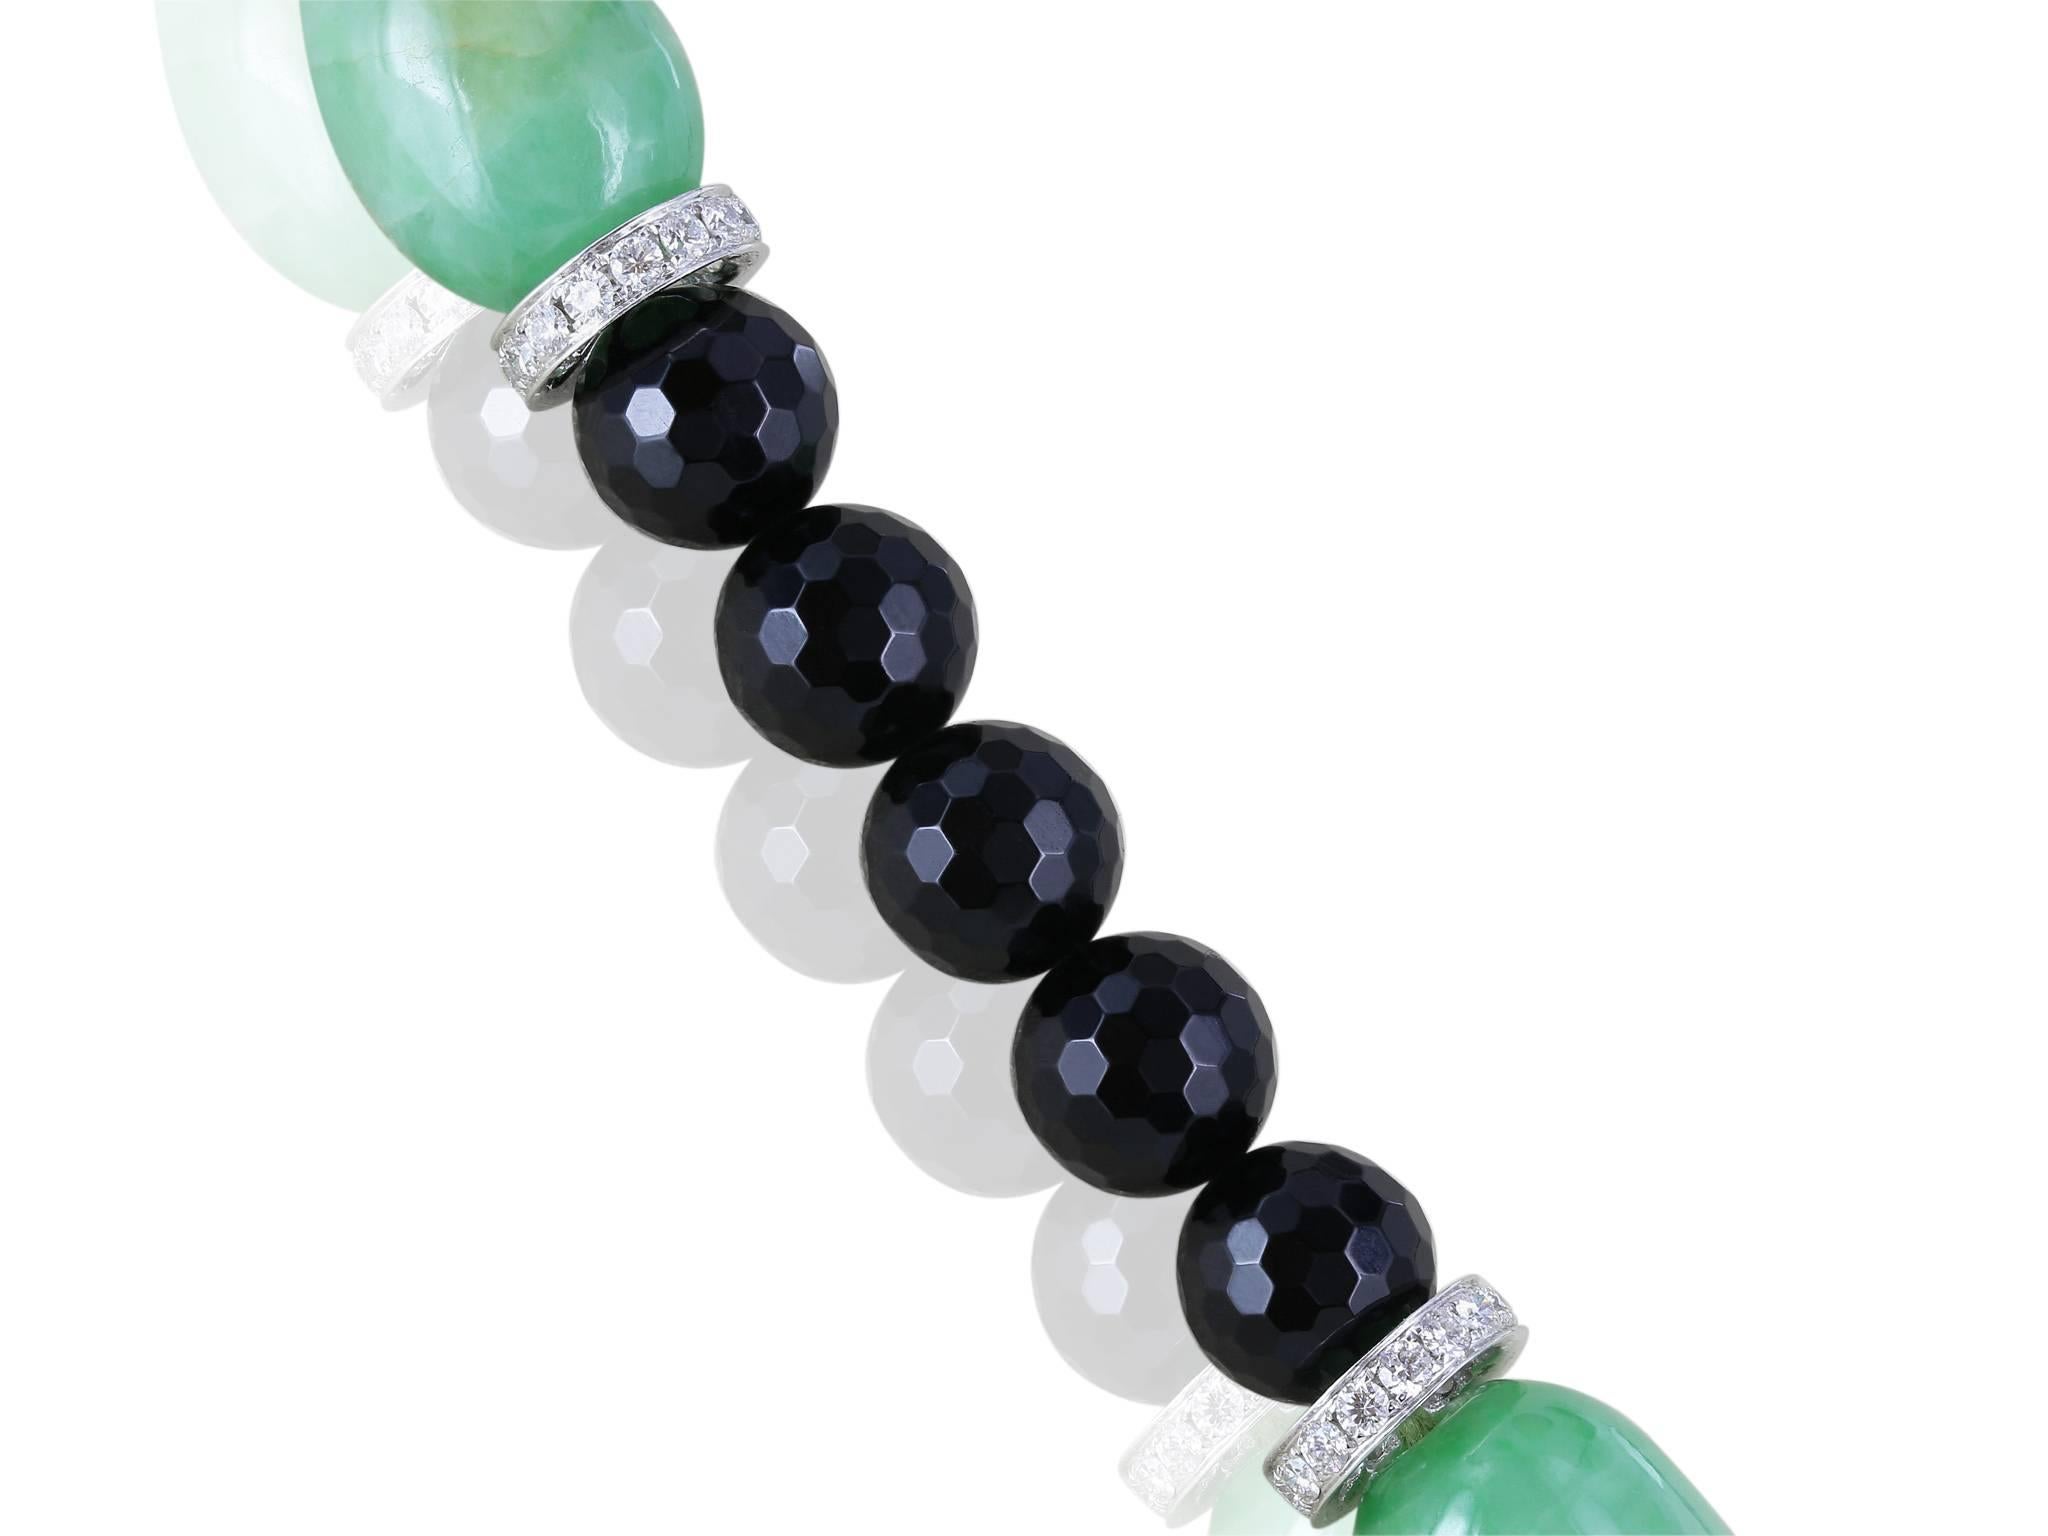 917.09 Carat certified type A Jade necklace interspersed with onyx beads and 18 karat white gold and diamond spacers totaling 2.79 carats.  The necklace also features an 18 karat white gold screw ball clasp with 2.60 carats of diamonds.  44 Inches